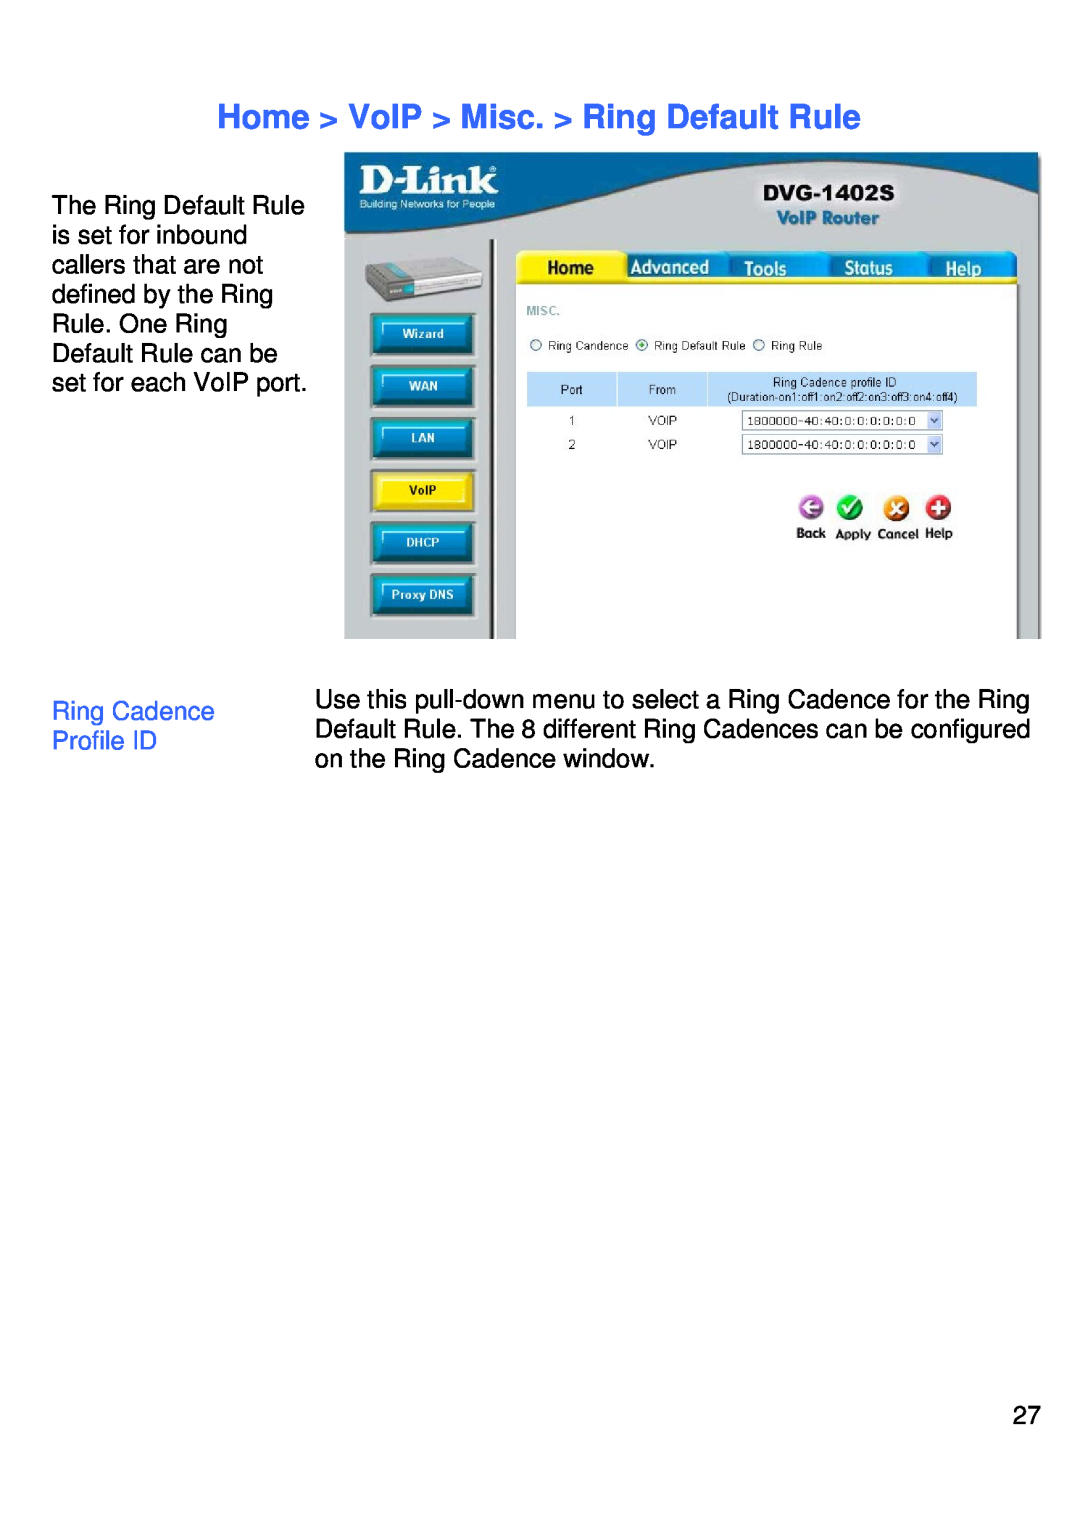 D-Link DVG-1402S manual Home VoIP Misc. Ring Default Rule, Profile ID, on the Ring Cadence window 